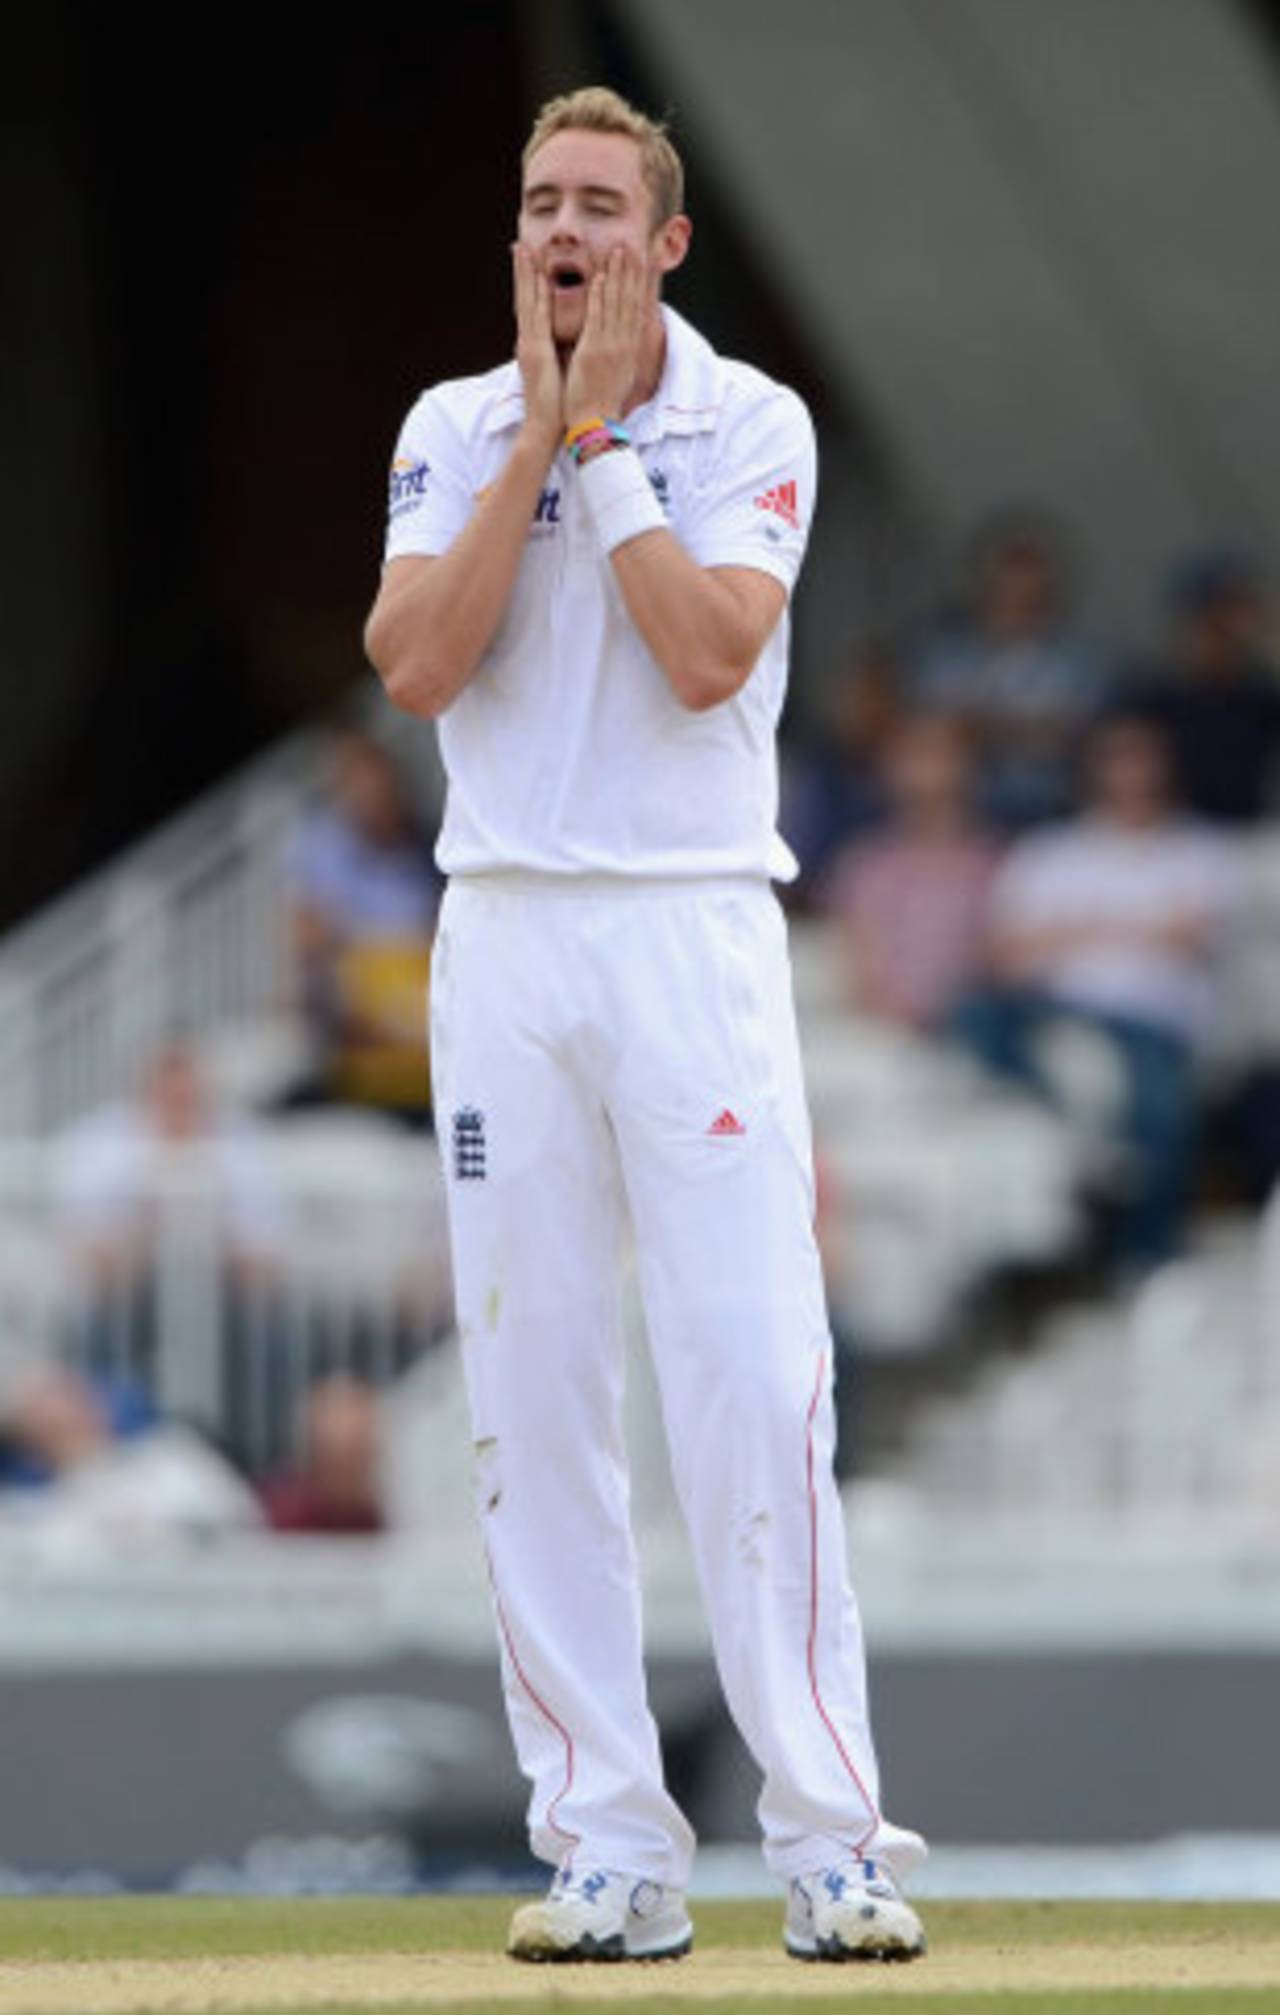 It was a difficult morning for the England bowlers, England v South Africa, 1st Investec Test, 3rd day, The Oval, July 21, 2012